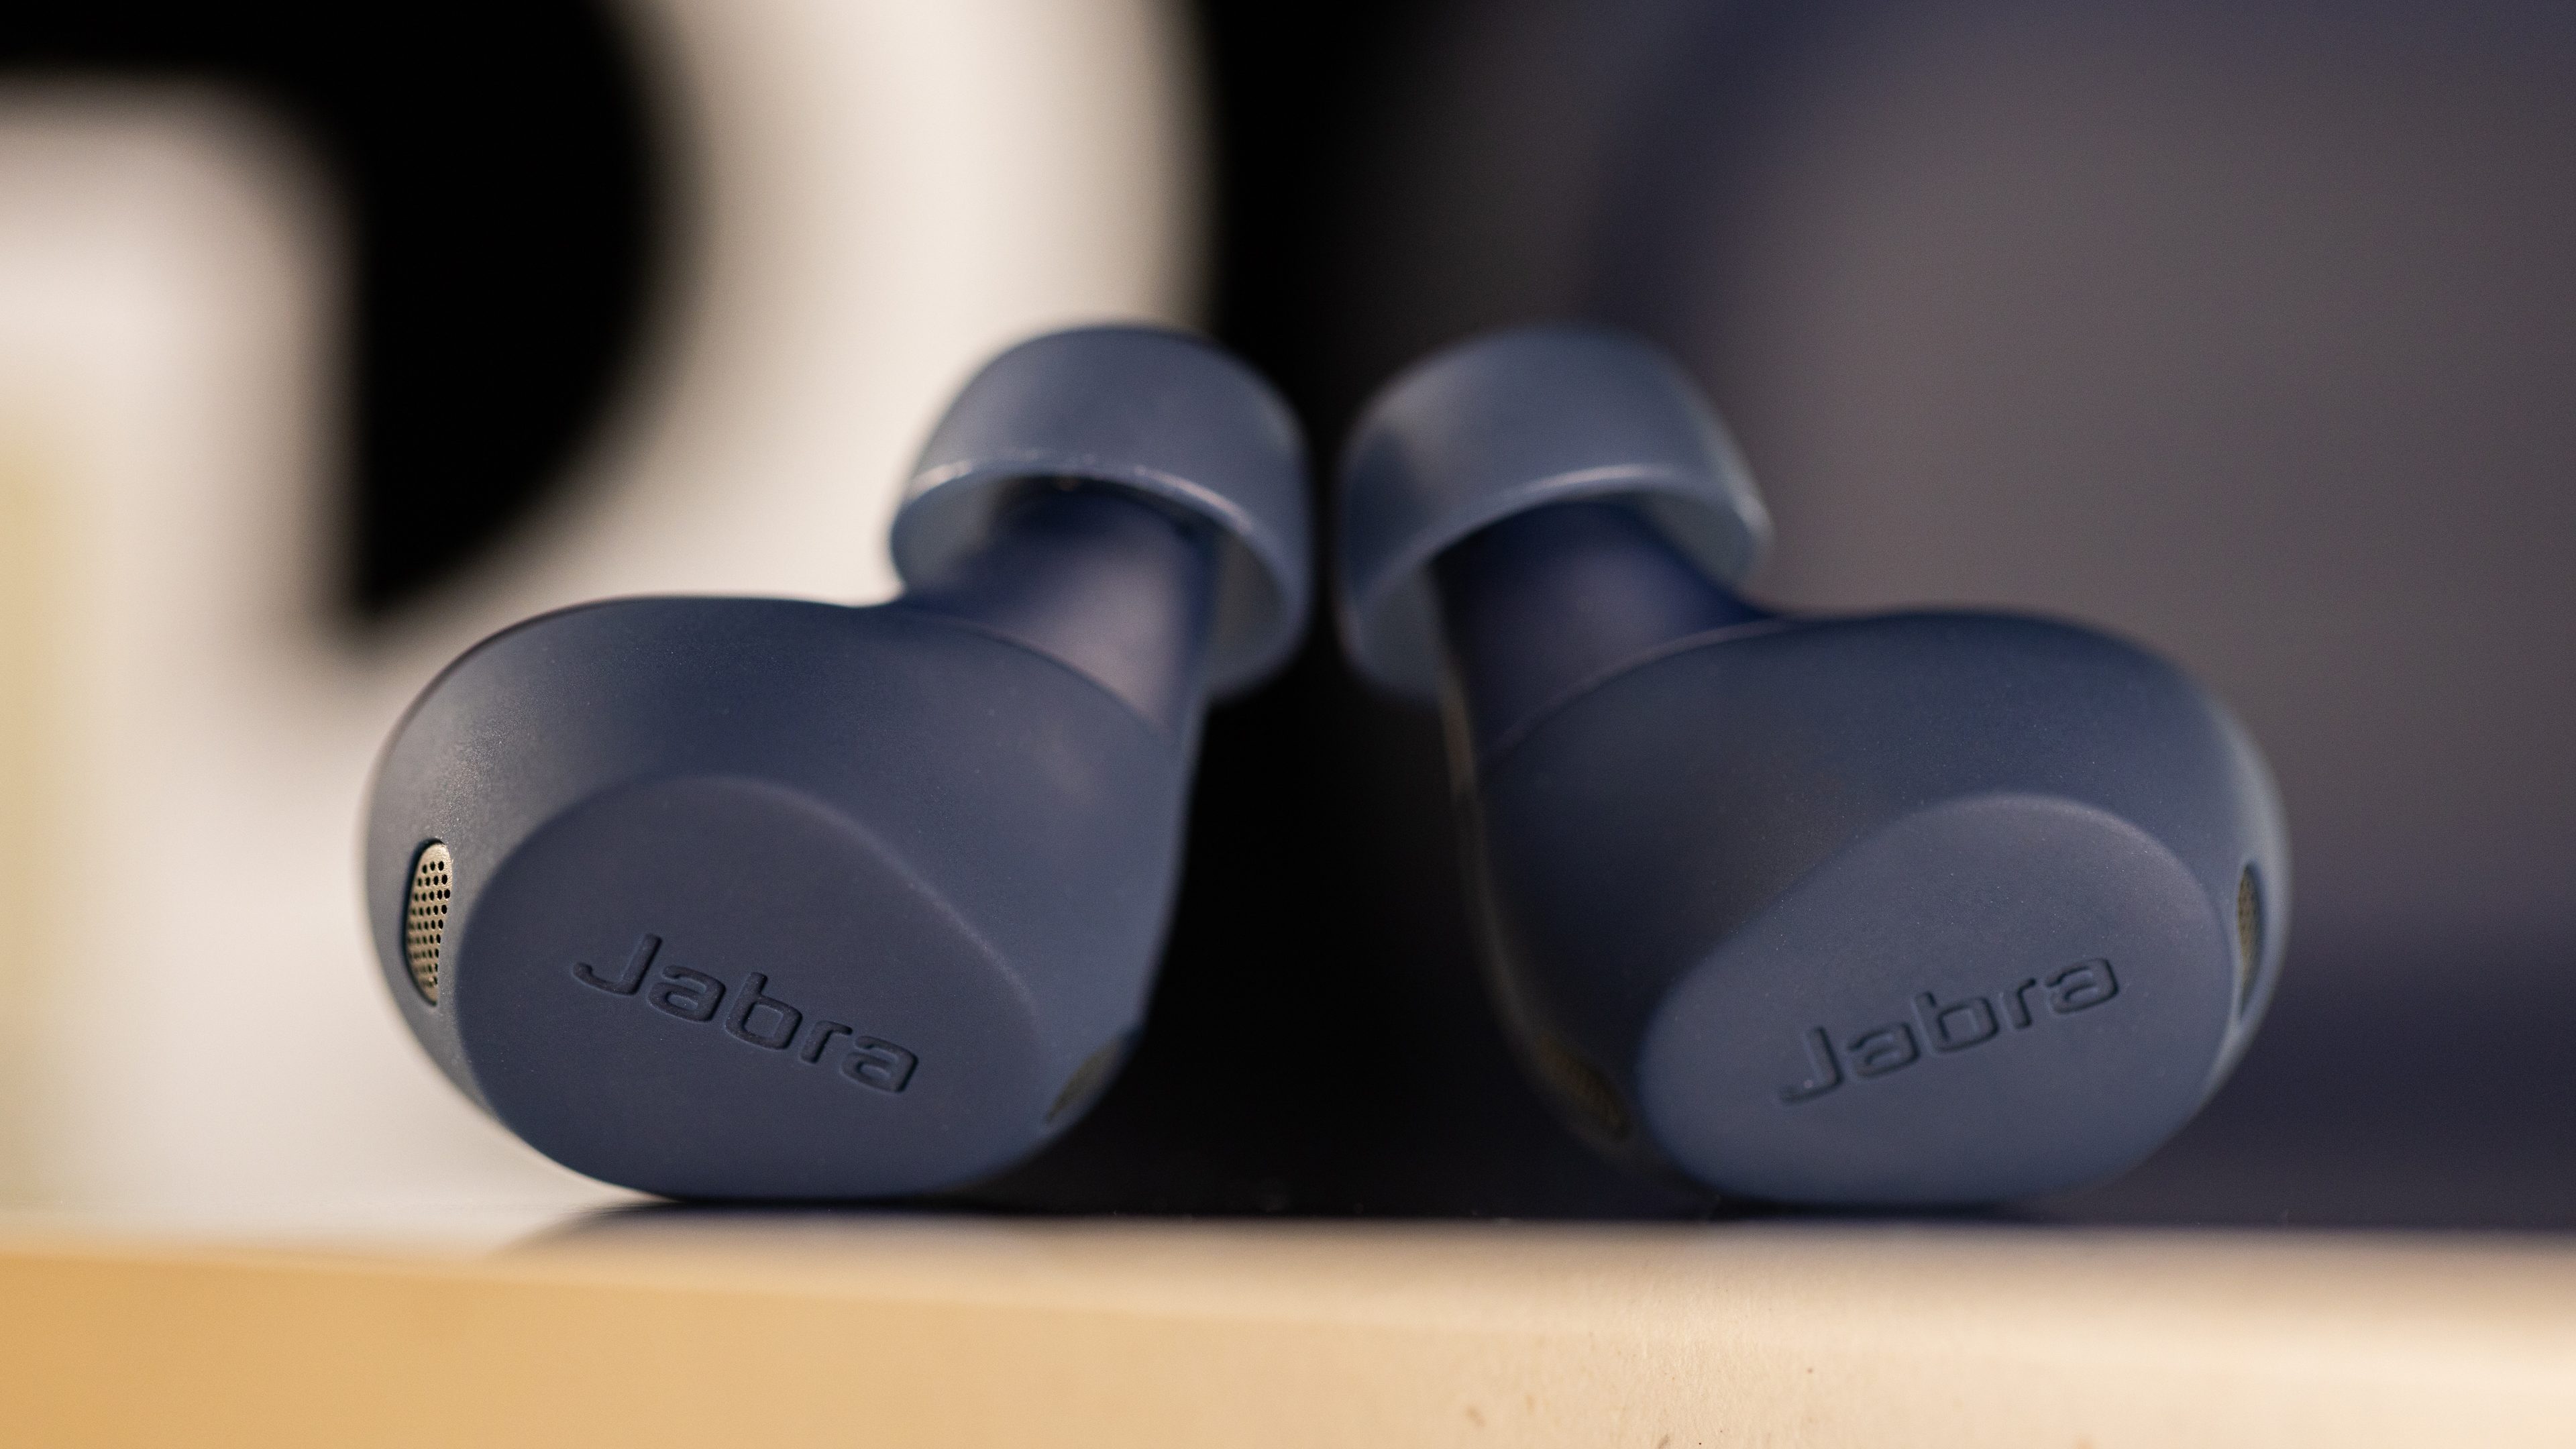 The Jabra Elite 10 earbuds are here to challenge the best from Sony and Bose